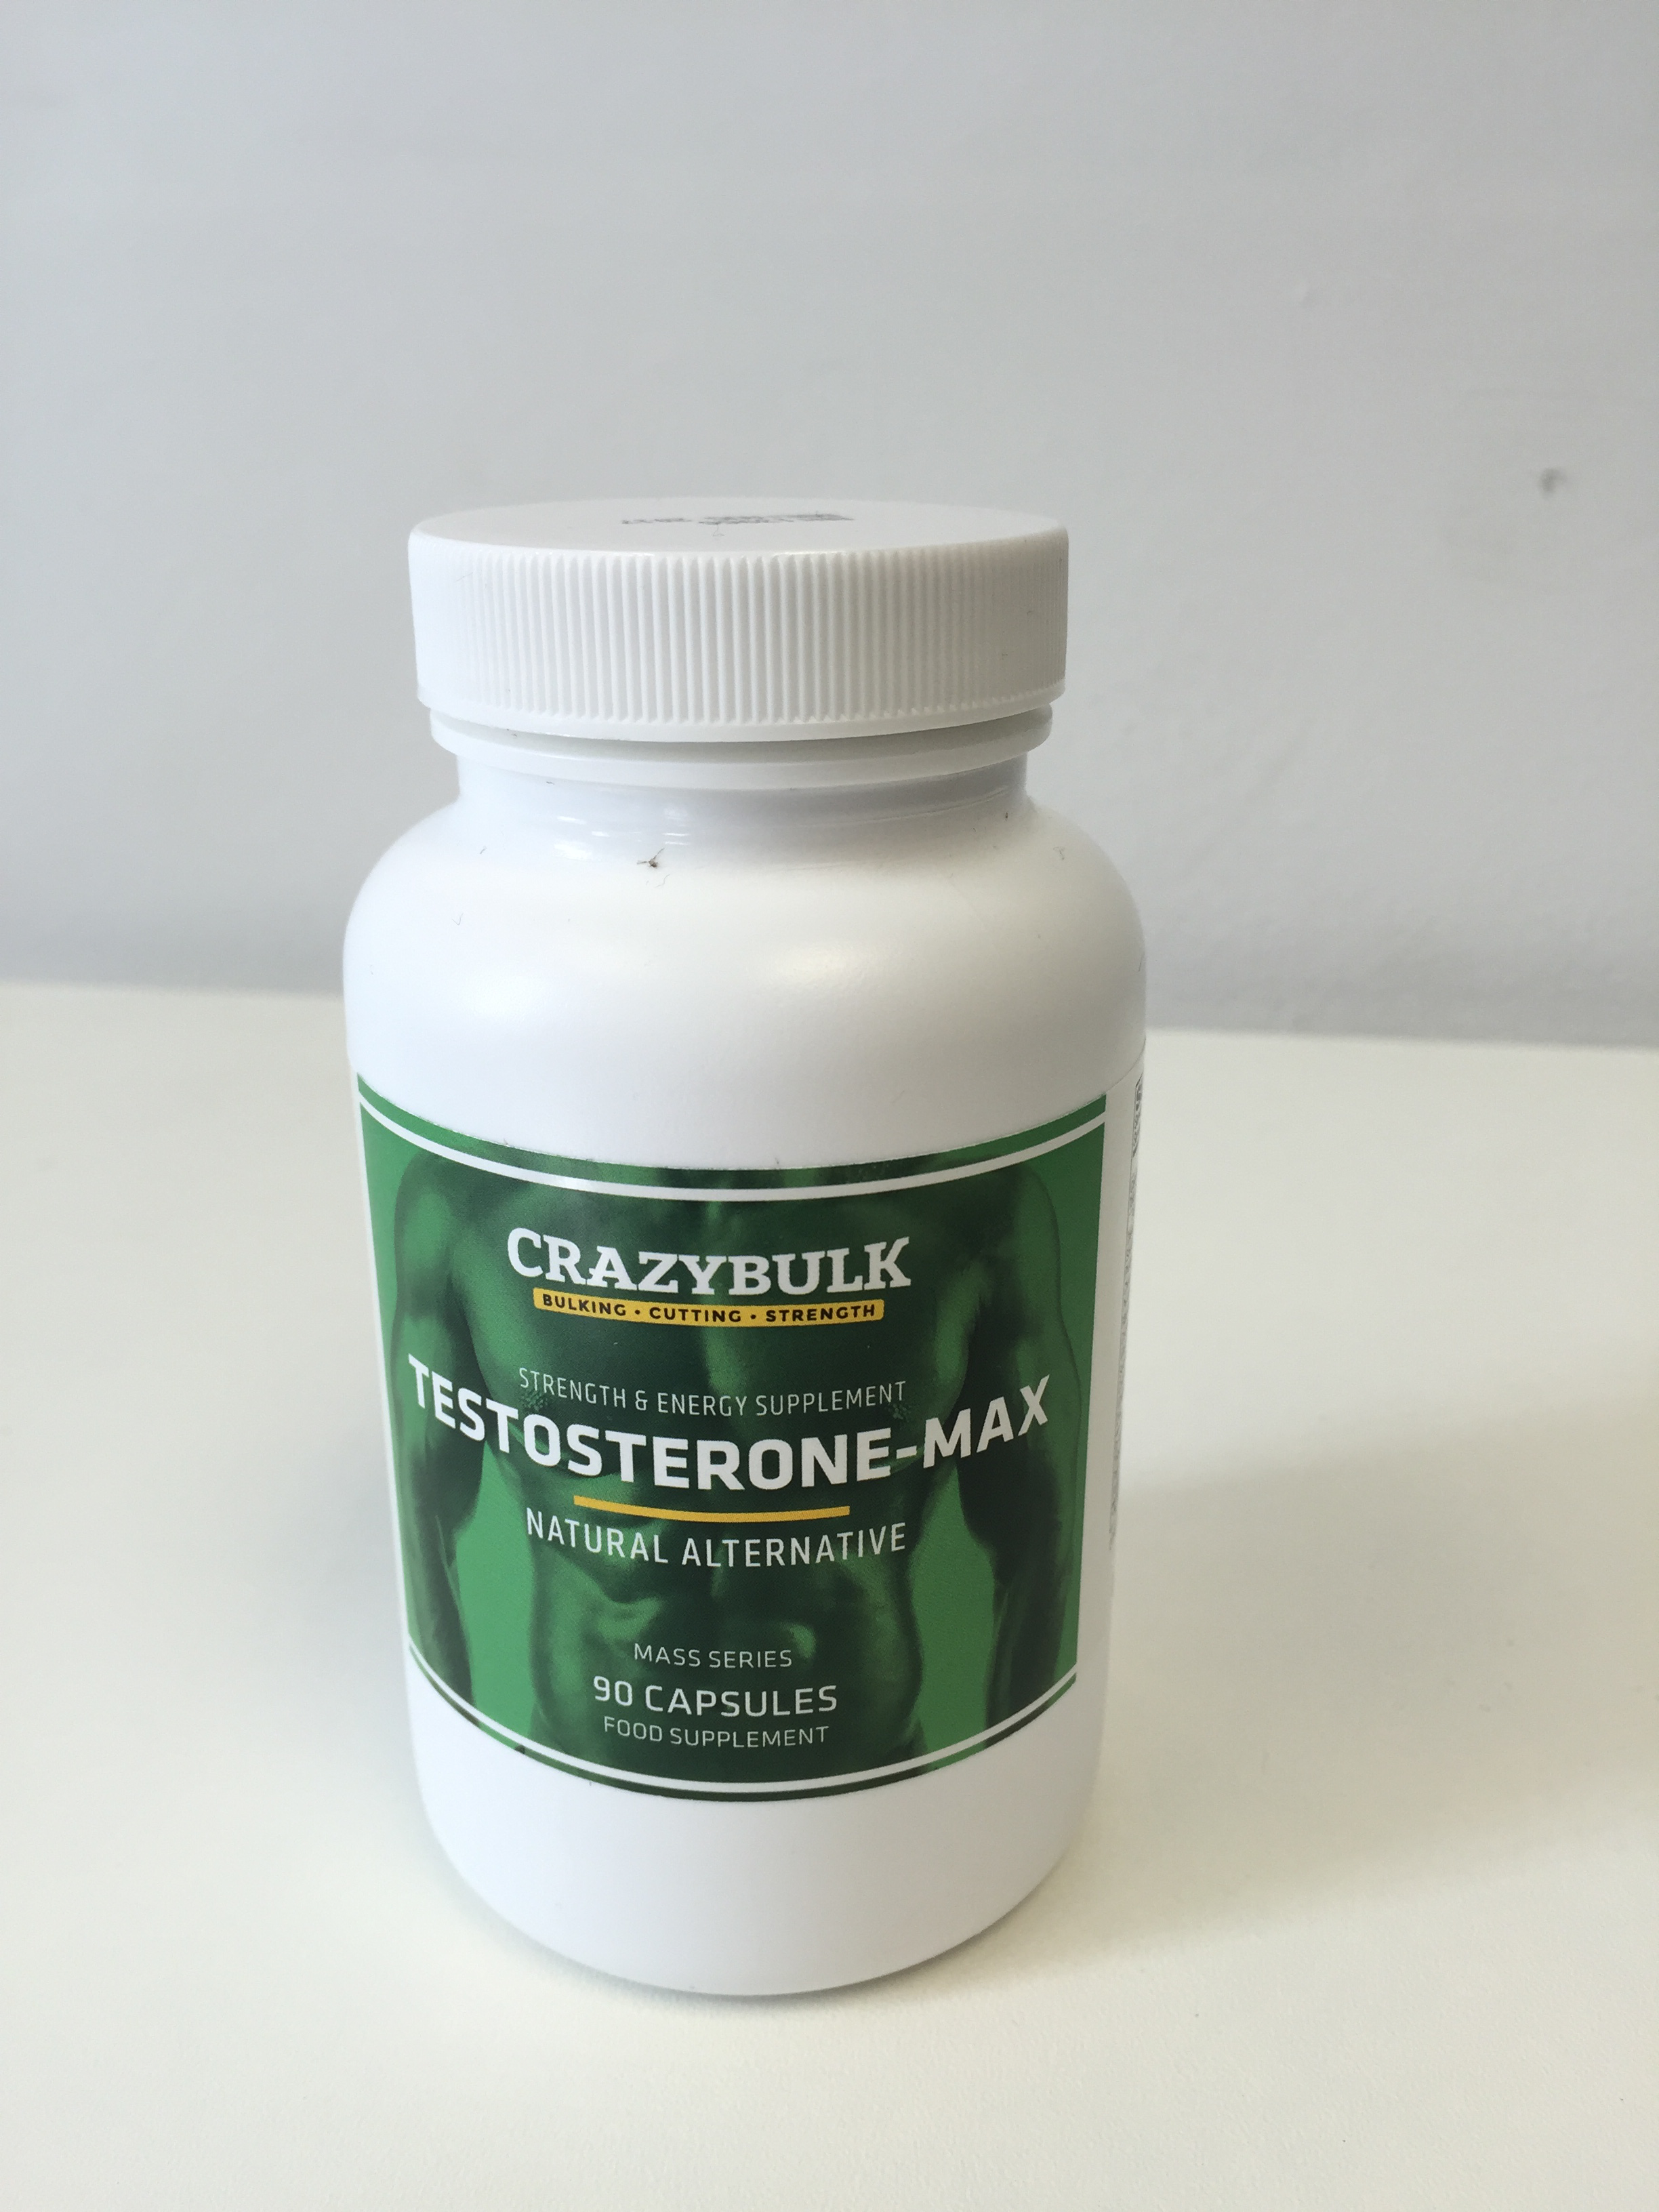 Best type of creatine for muscle growth